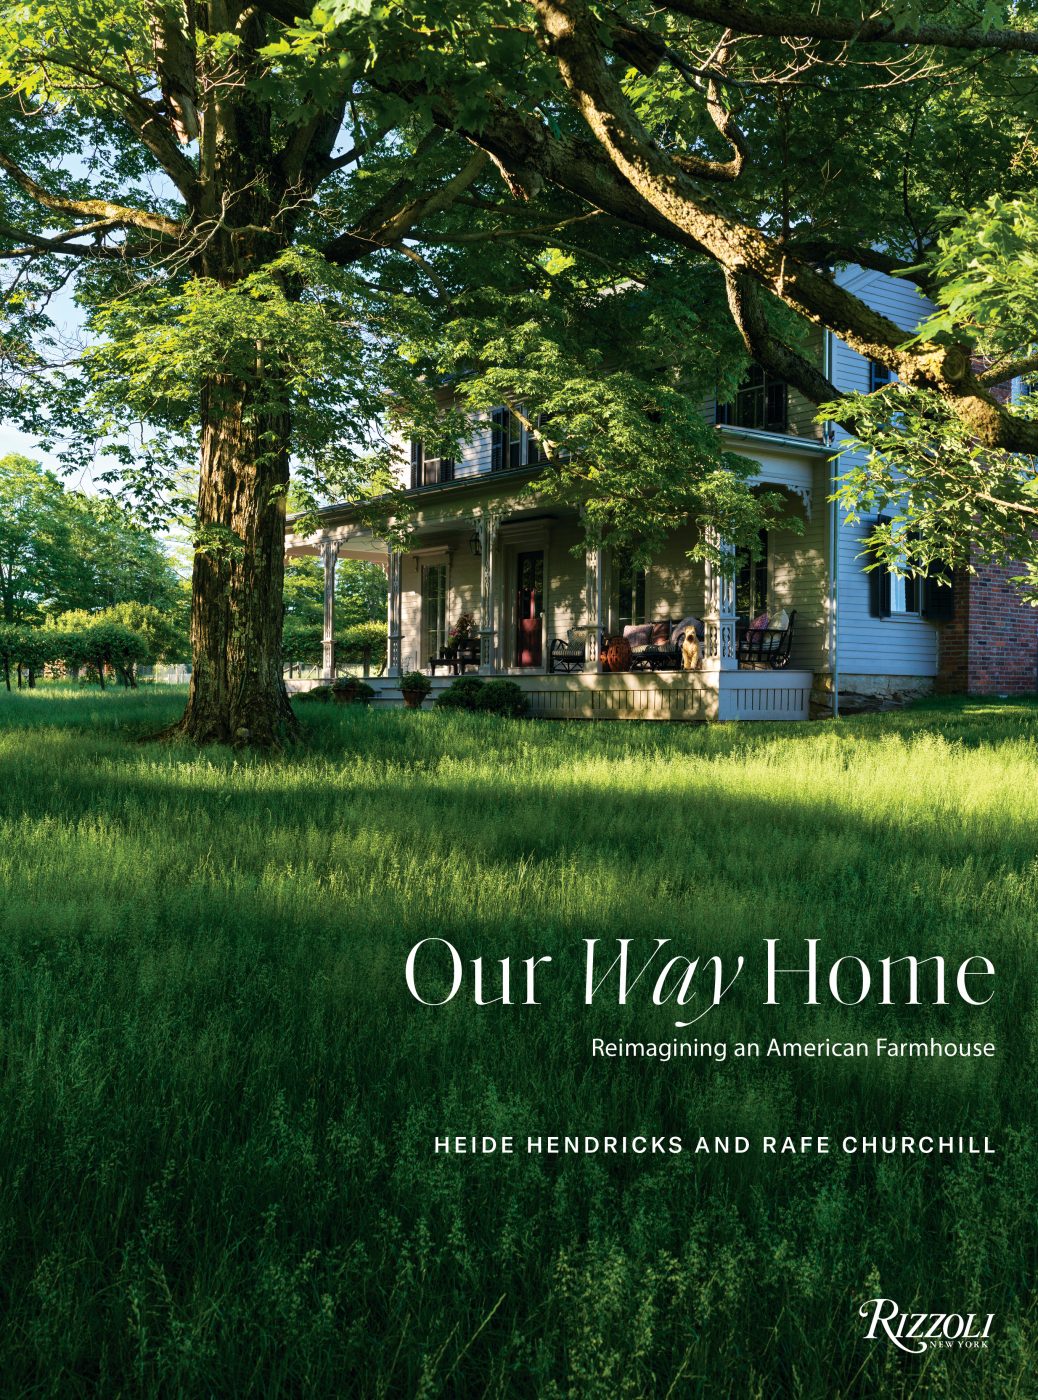 Book Cover: Our Way Home: Reimagining an American Farmhouse, by Heide Hendricks and Rafe Churchill (Rizzoli)